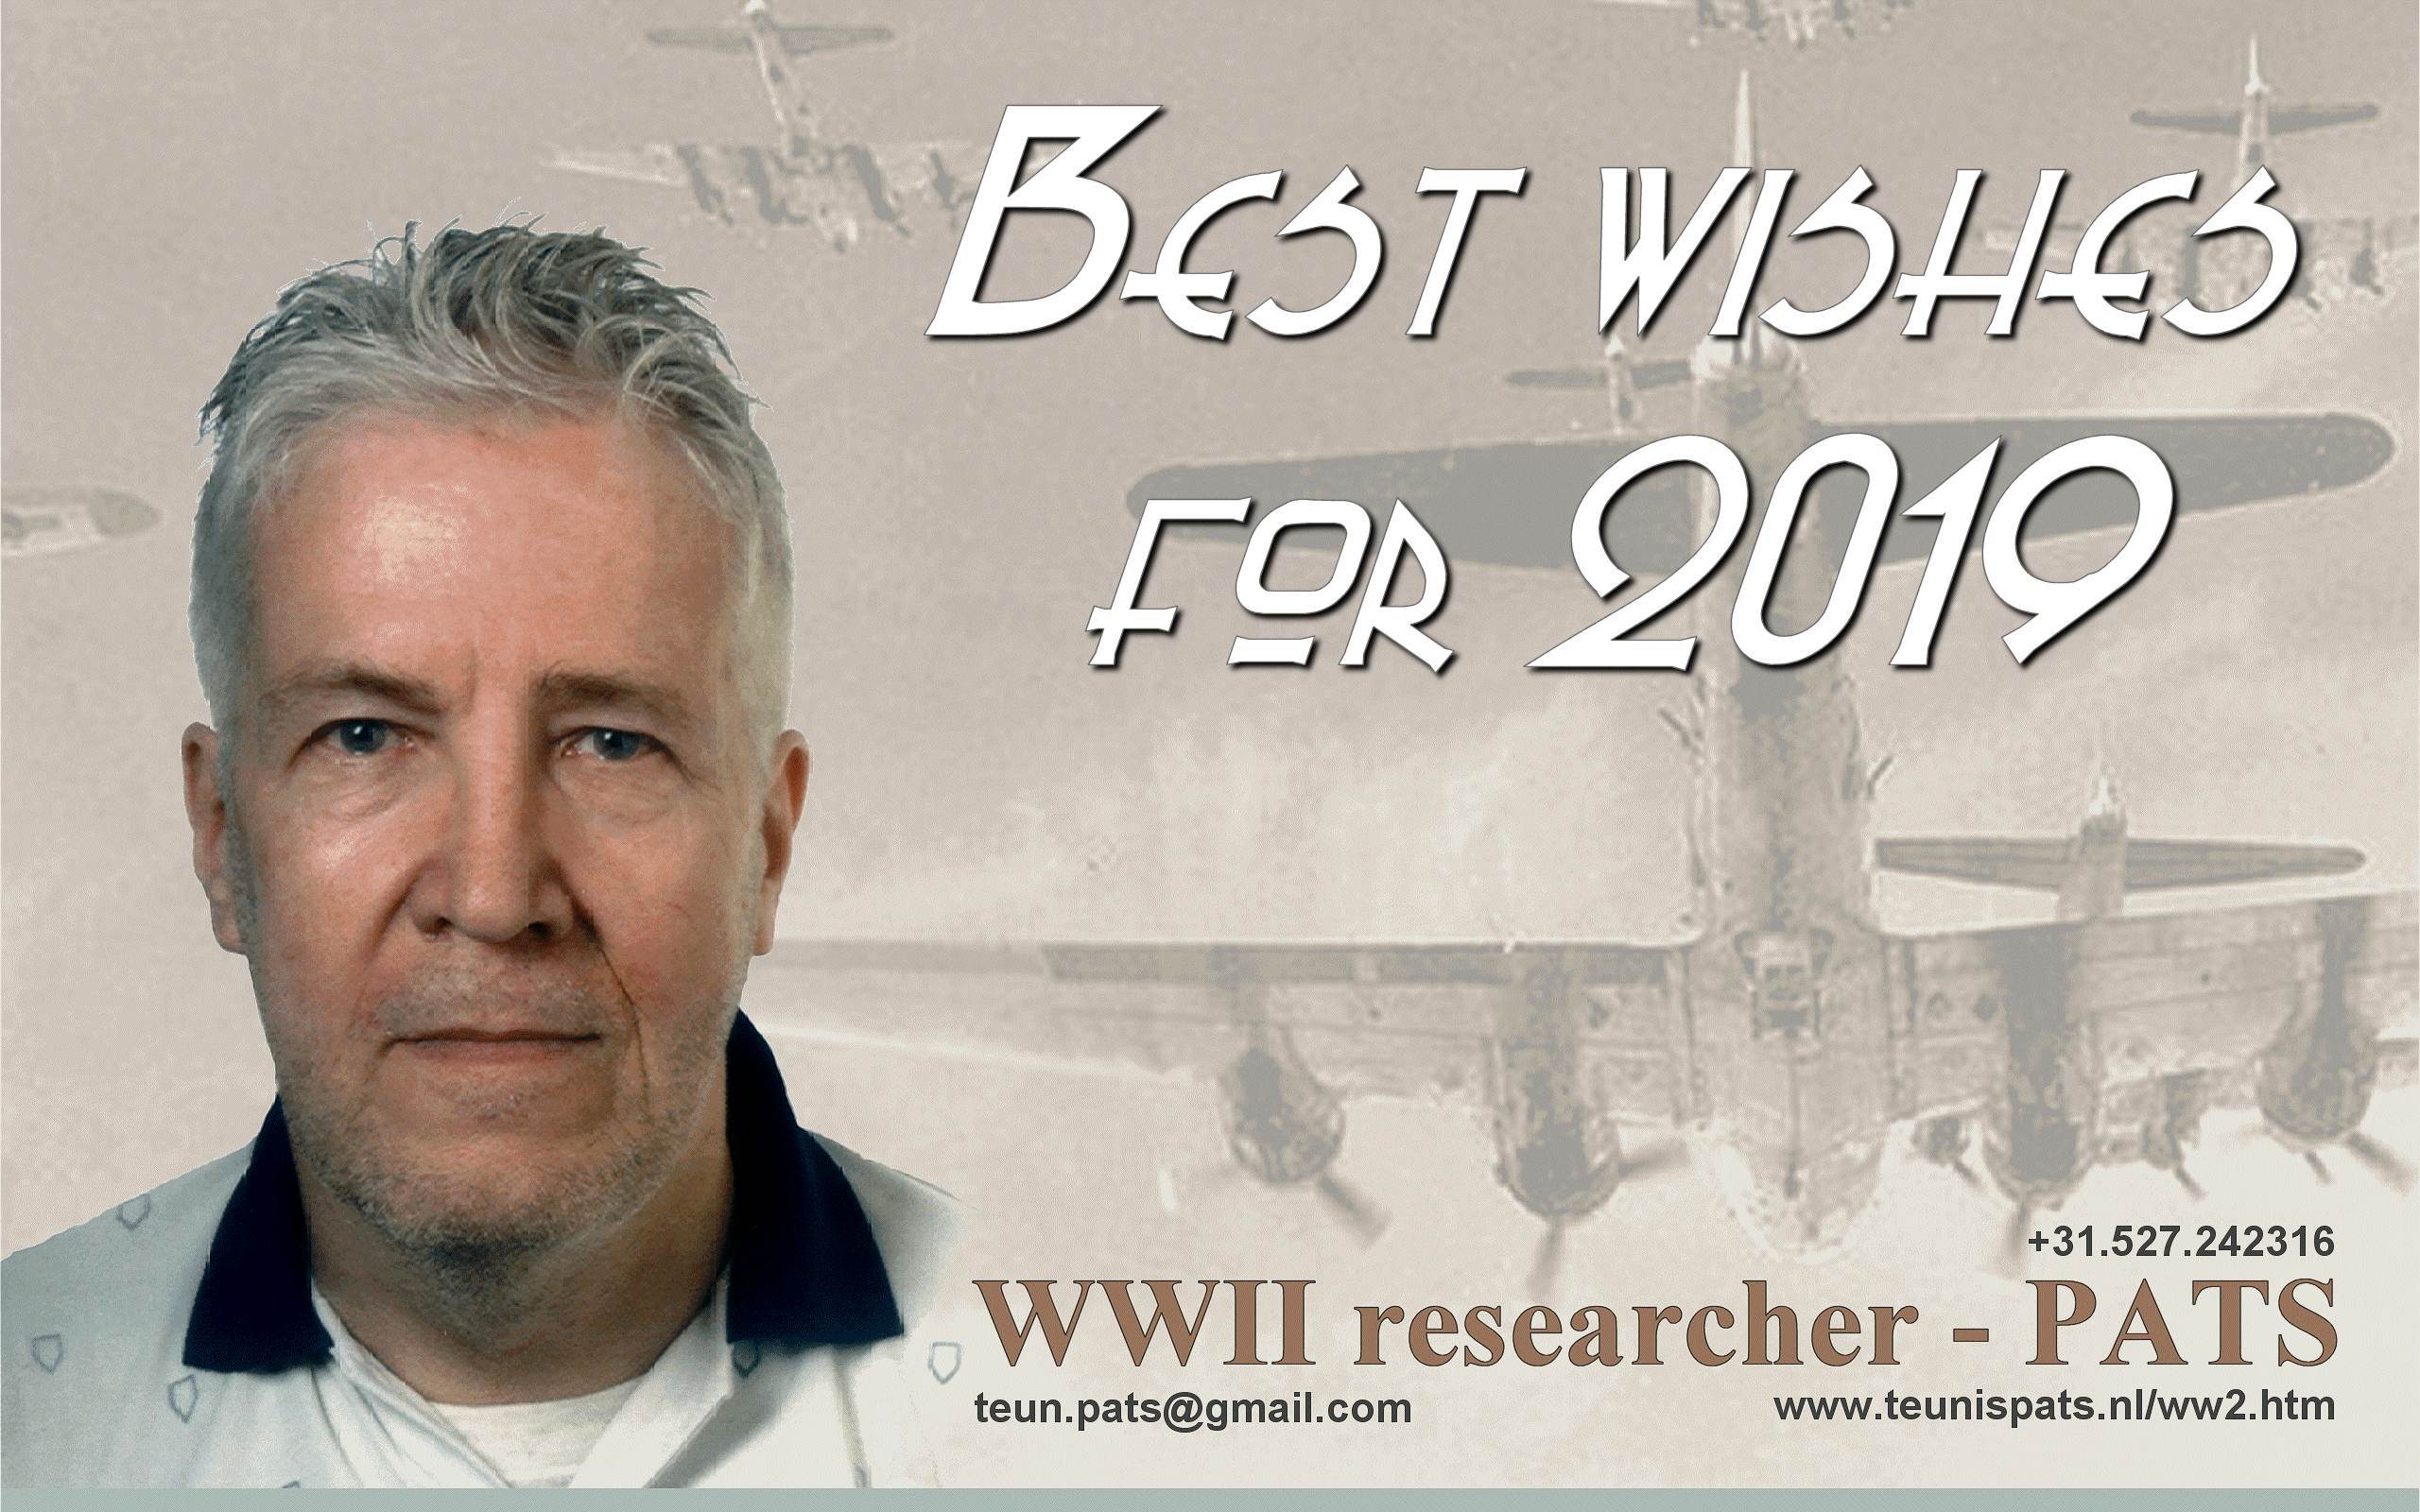 WWII researcher - PATS